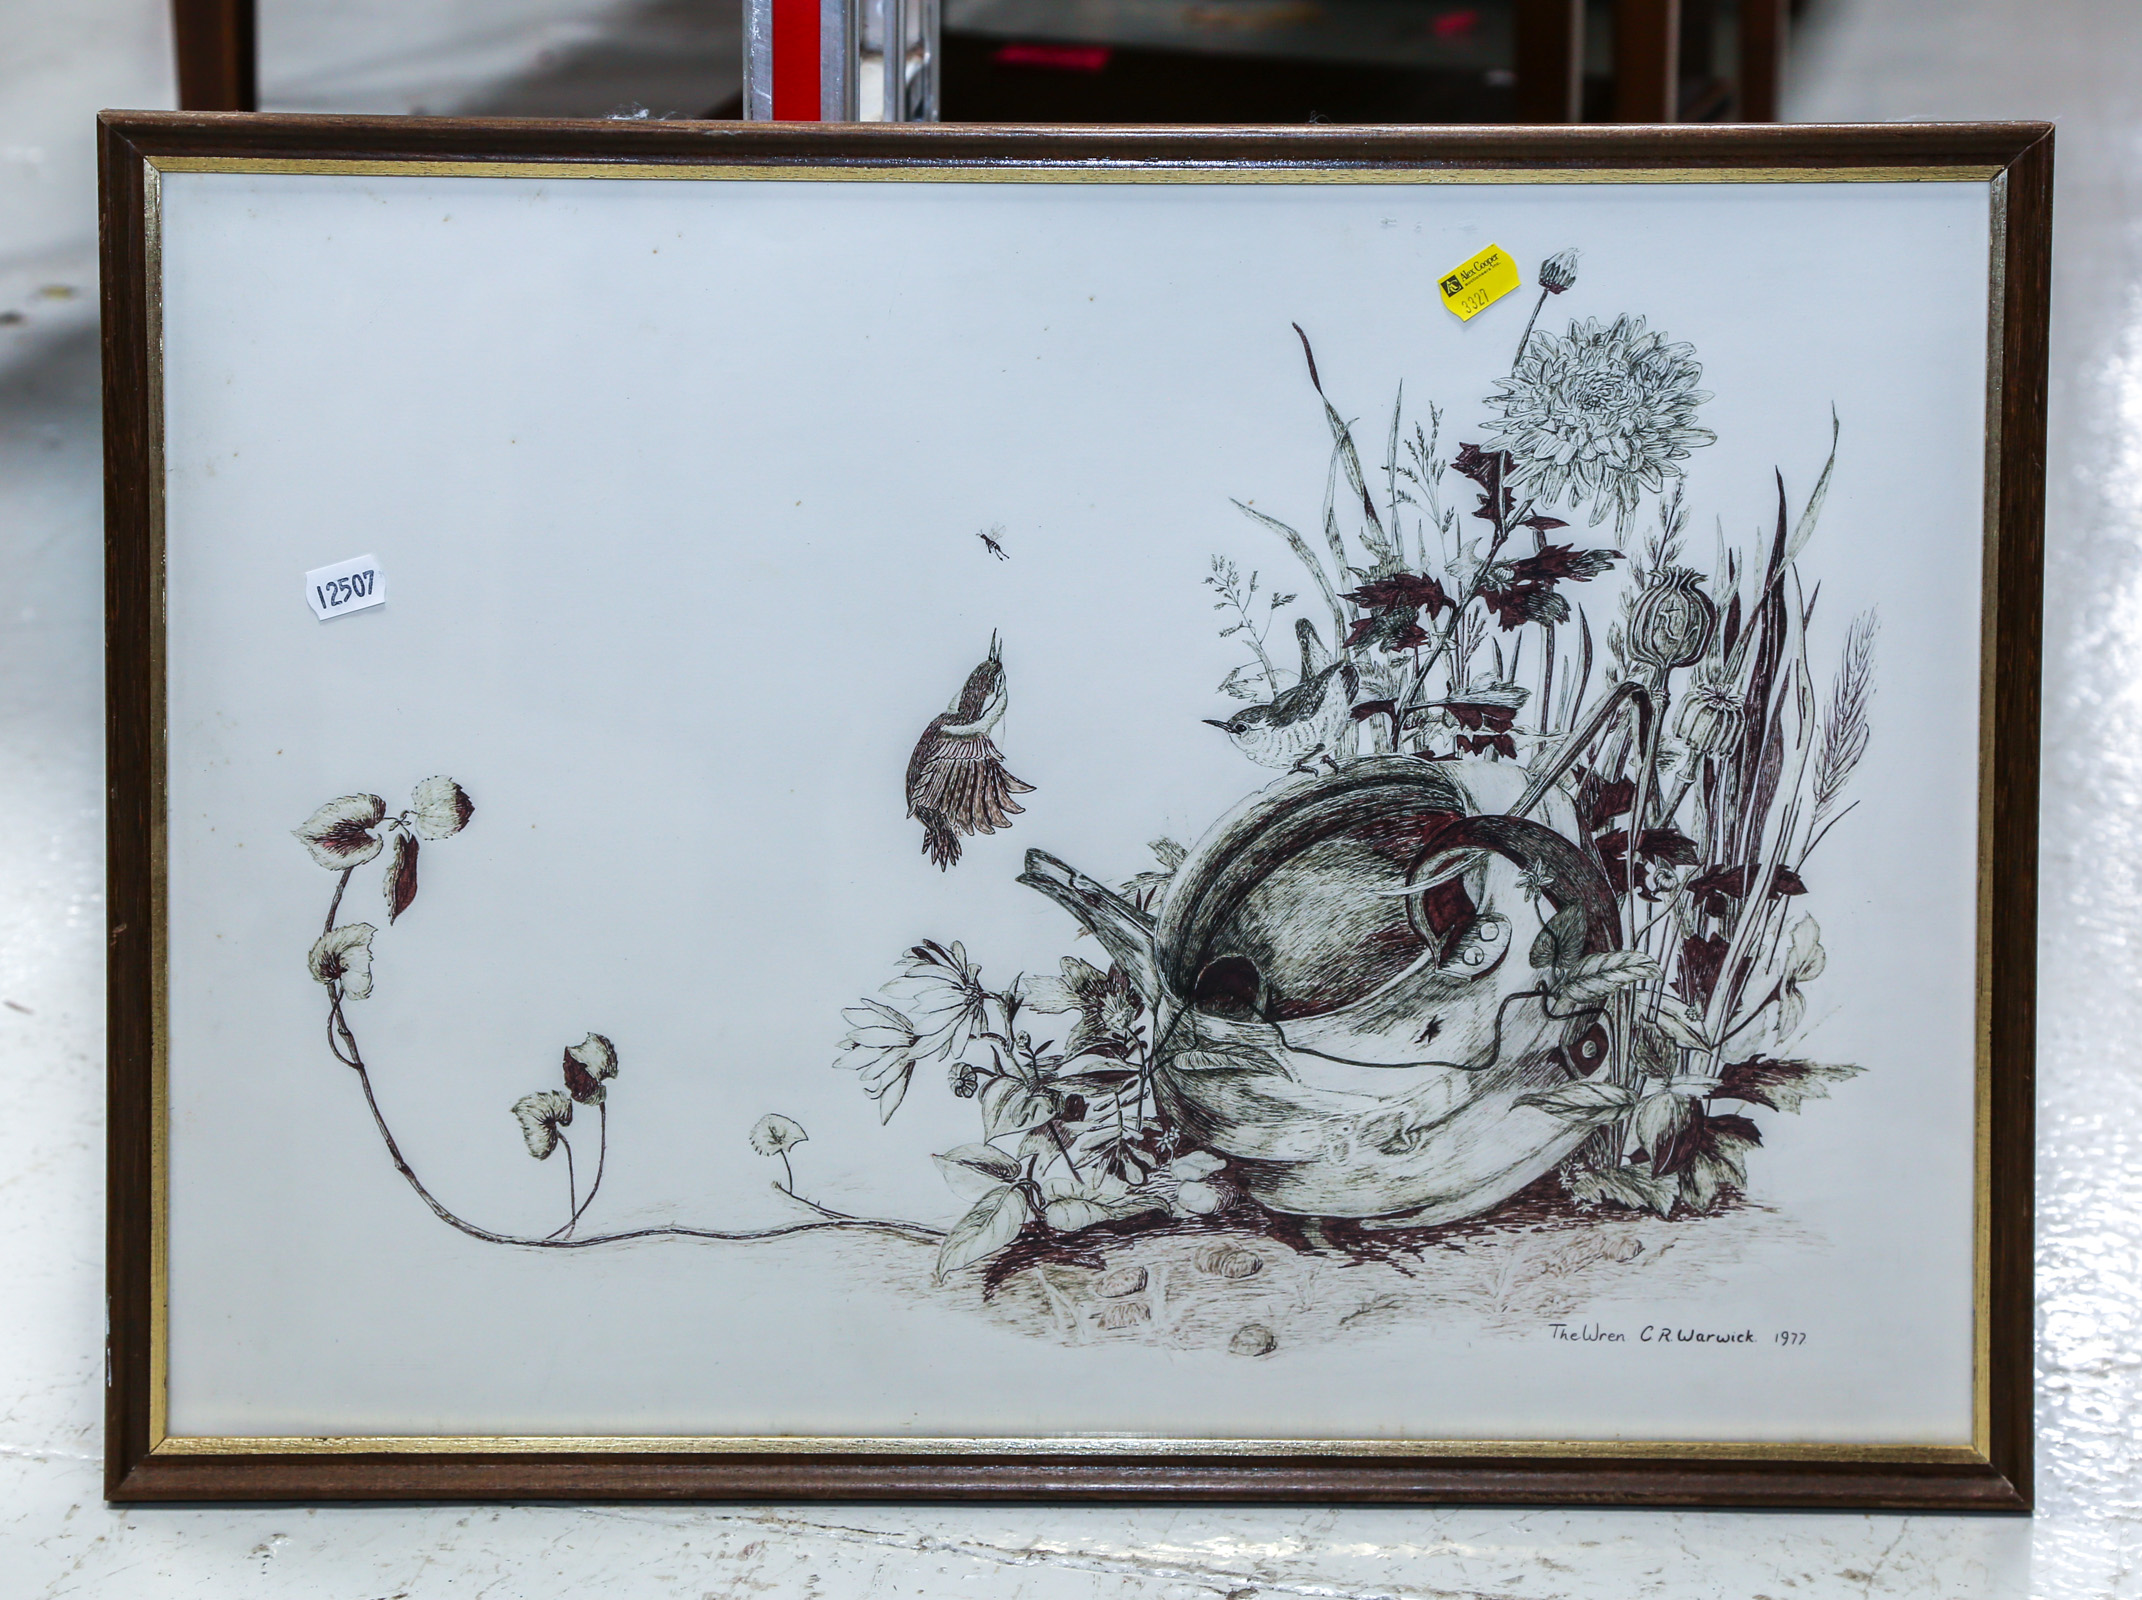 FRAMED LITHOGRAPH OF WREN BY C.R. WARWICK